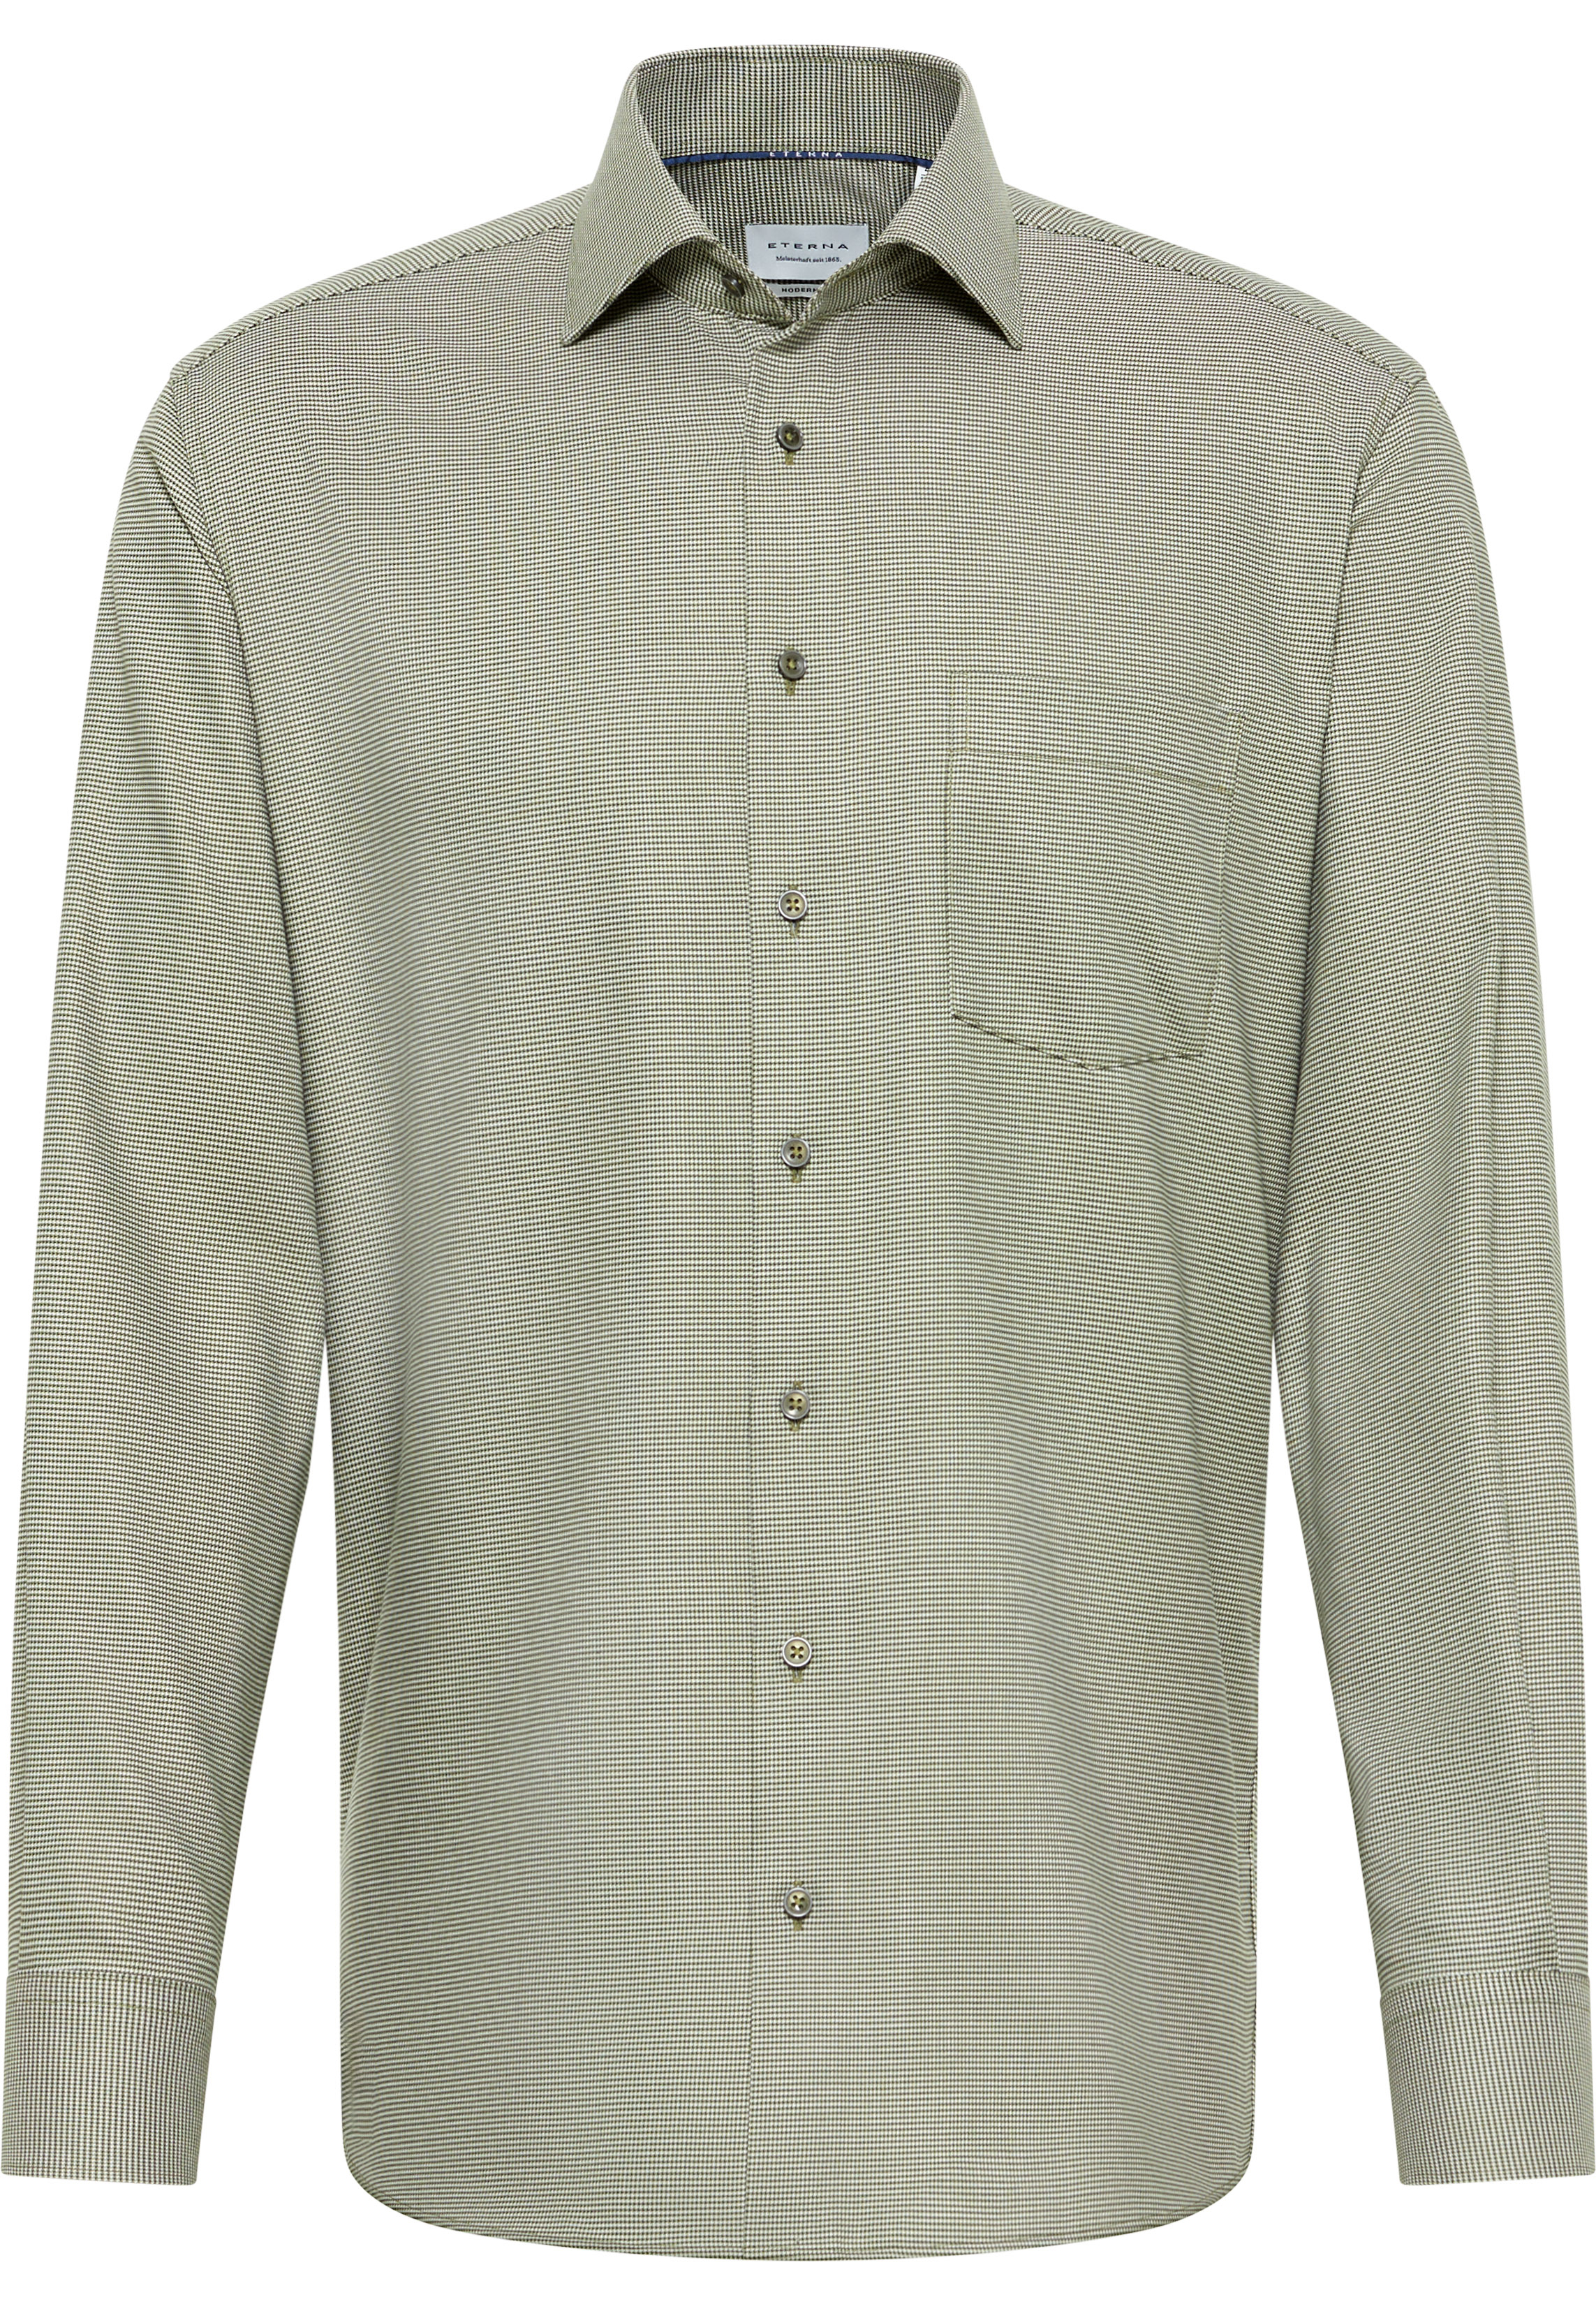 MODERN FIT Shirt in green structured